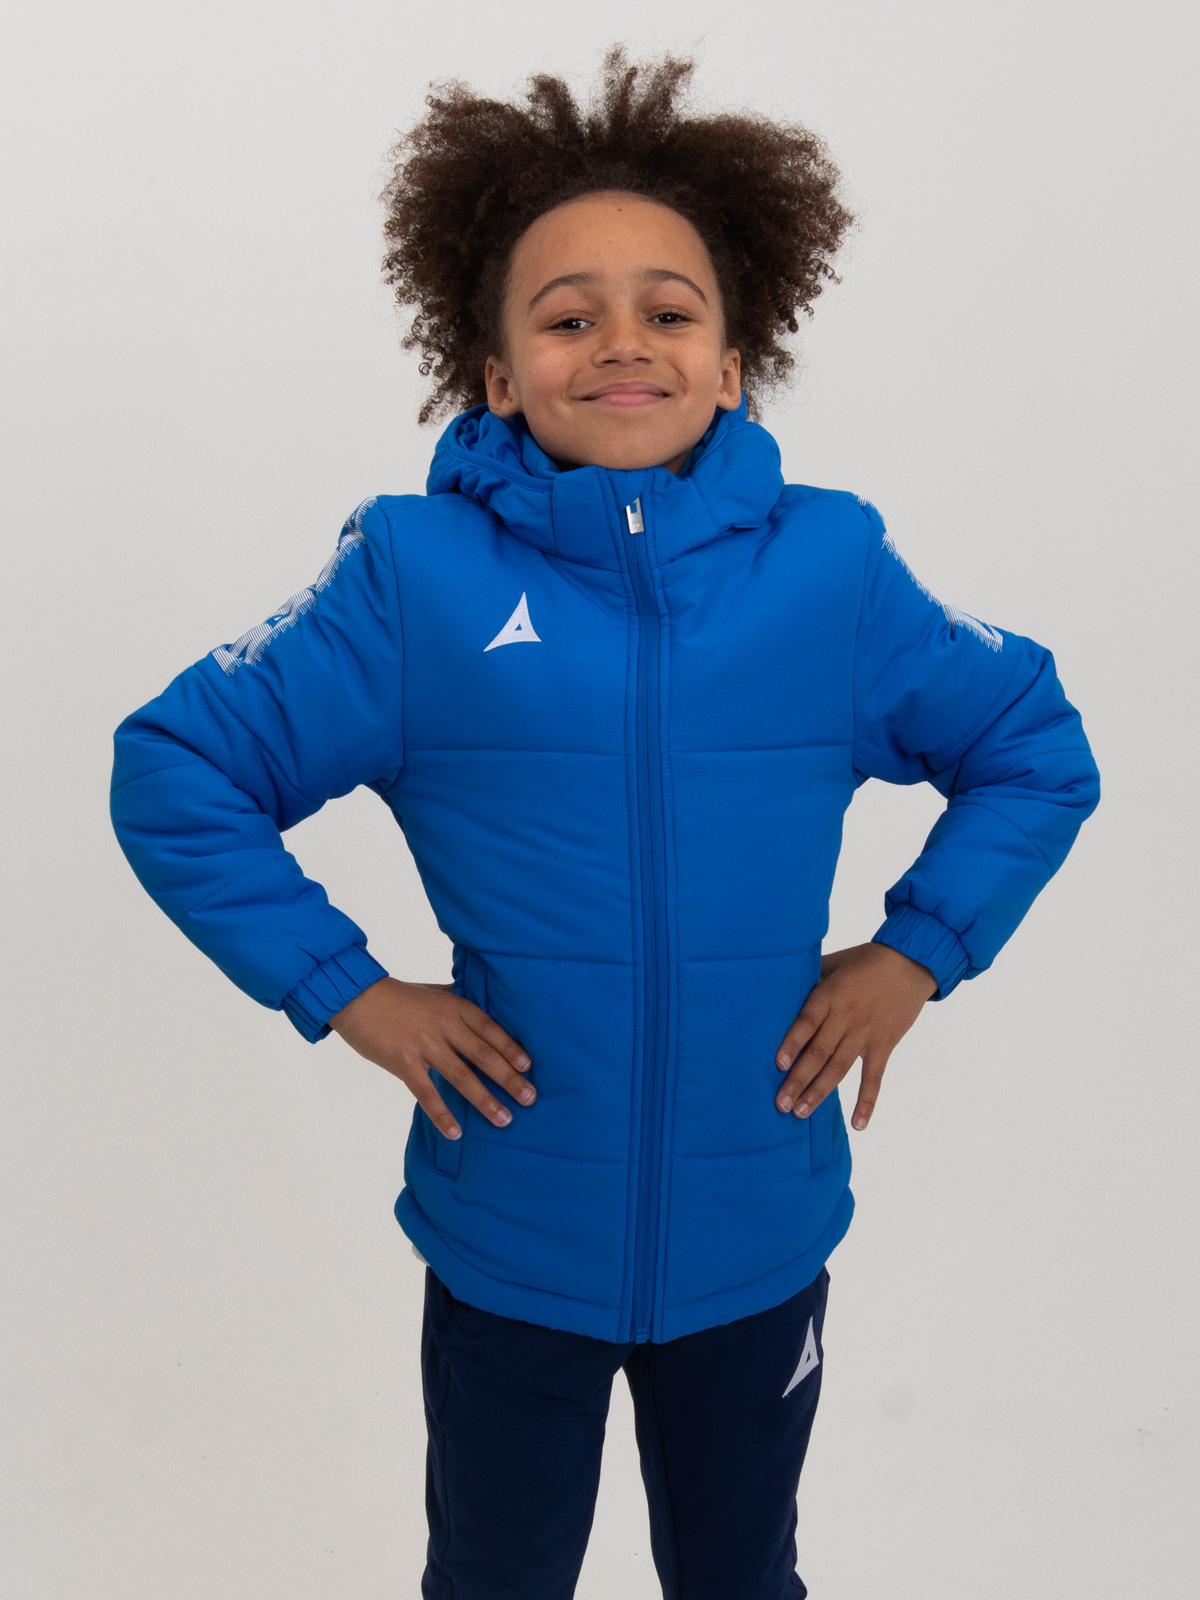 this childrens winter coat in royal blue is designed to keep kids warm in the cold.